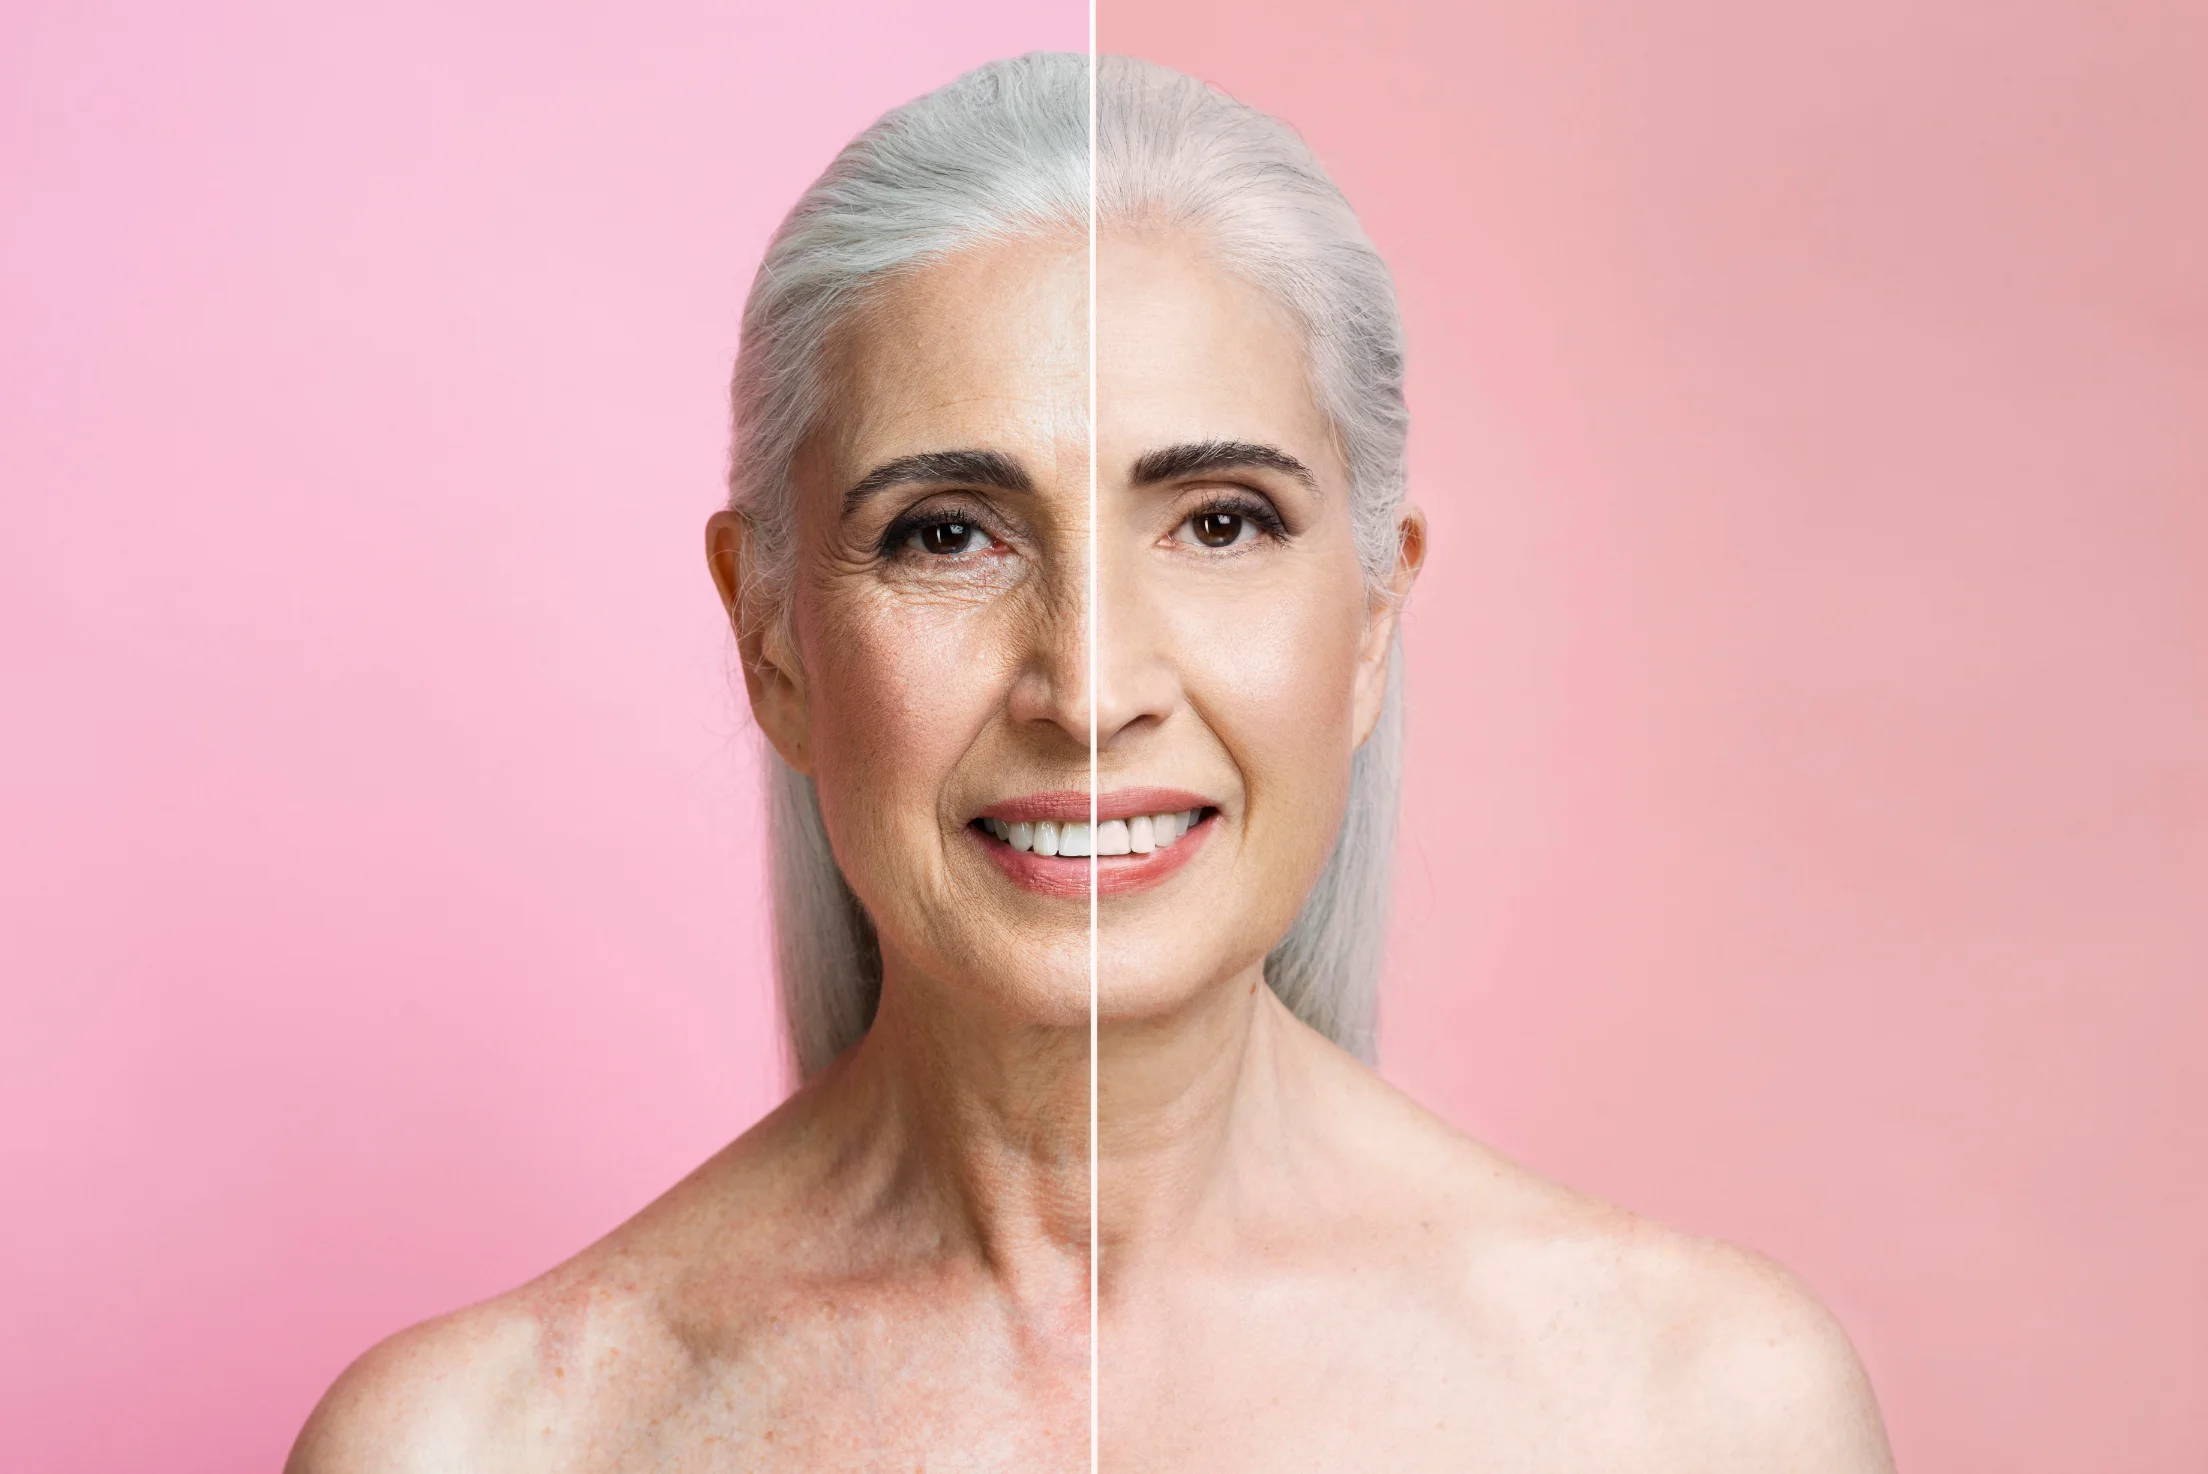 An older woman demonstrates the results after a Profhilo treatment.